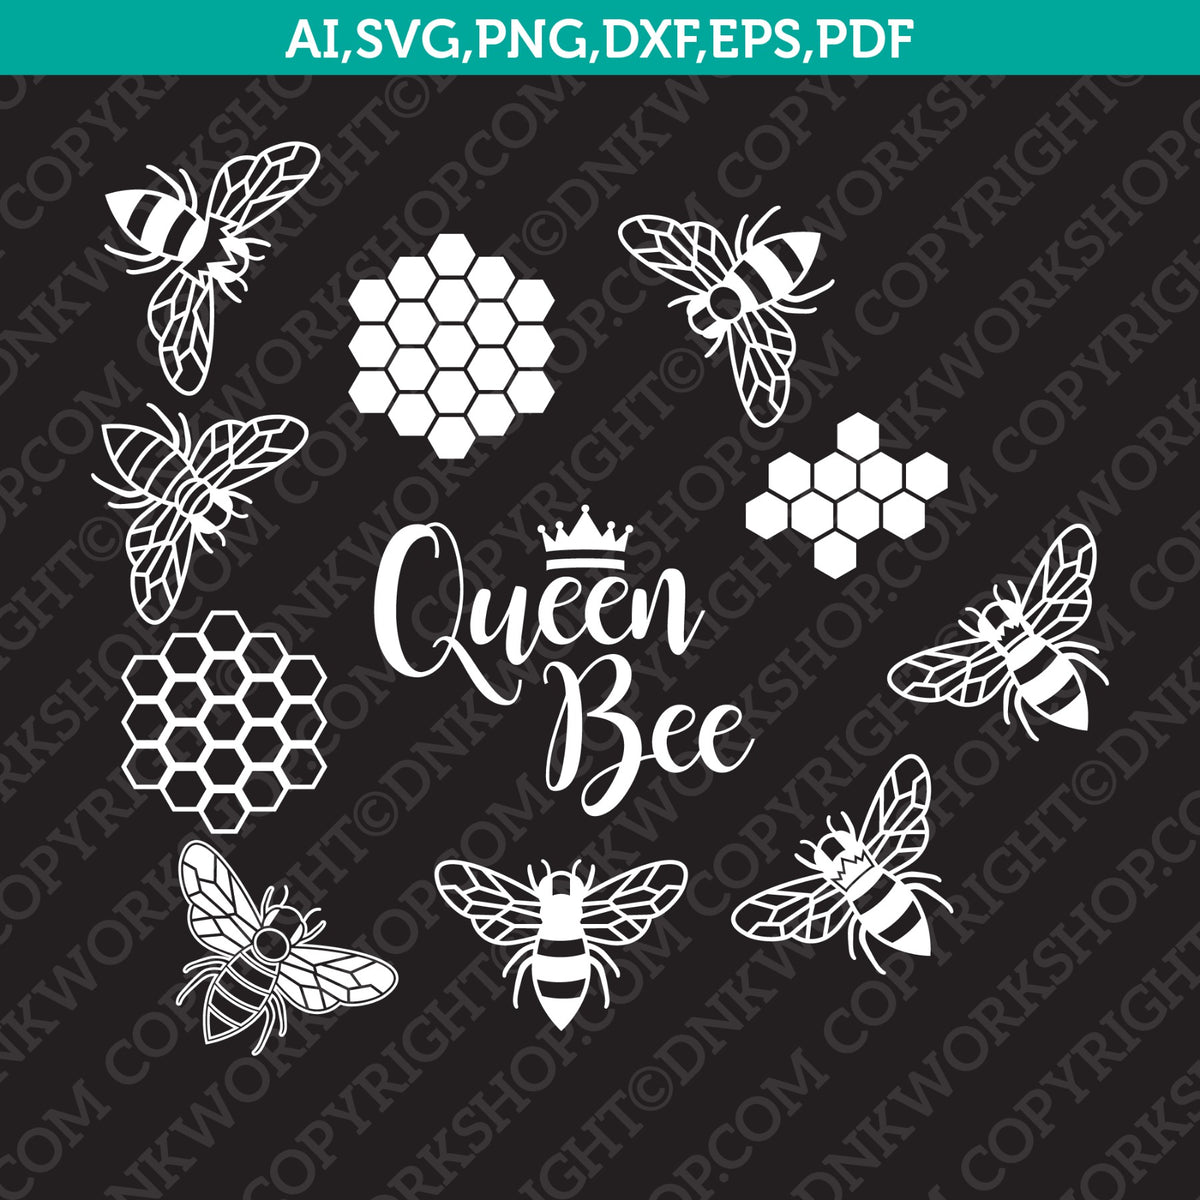 Queen Bee SVG Vector Silhouette Cameo Cricut Cut File Clipart Png Eps